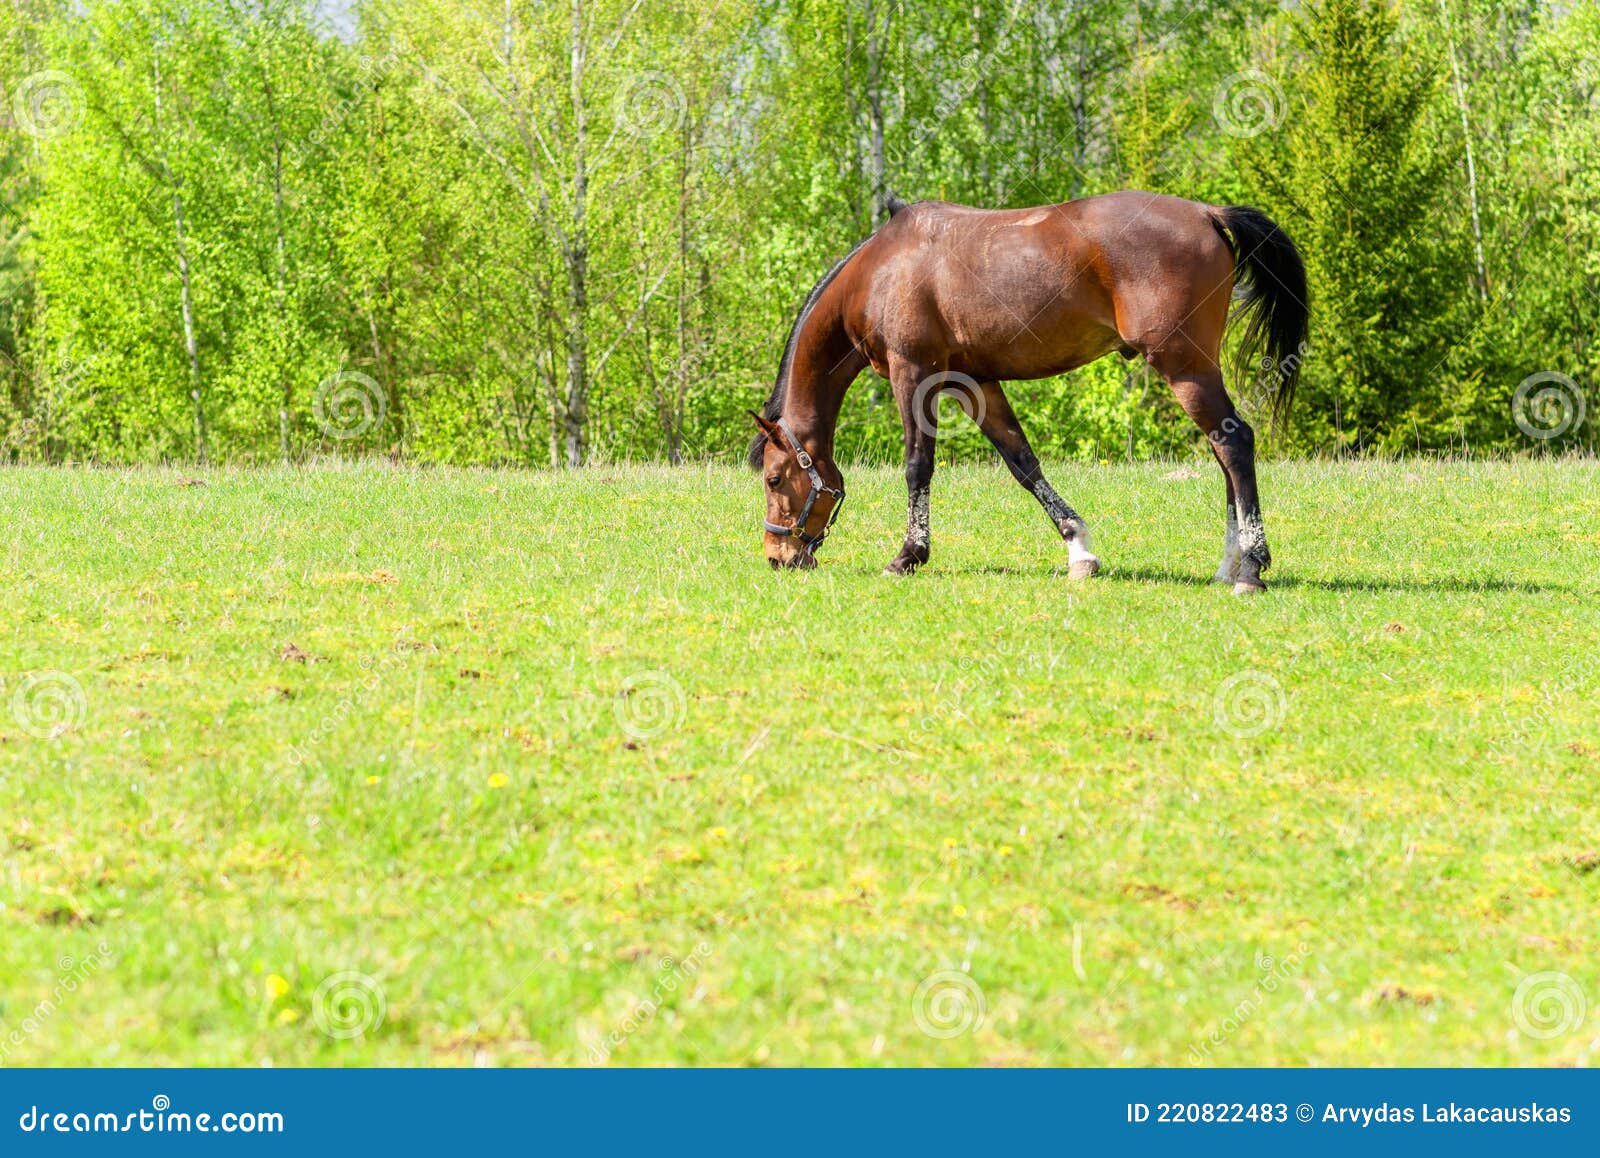 Magnificent Graceful Chestnut Horse in Meadow Field.the Horse Eats the ...